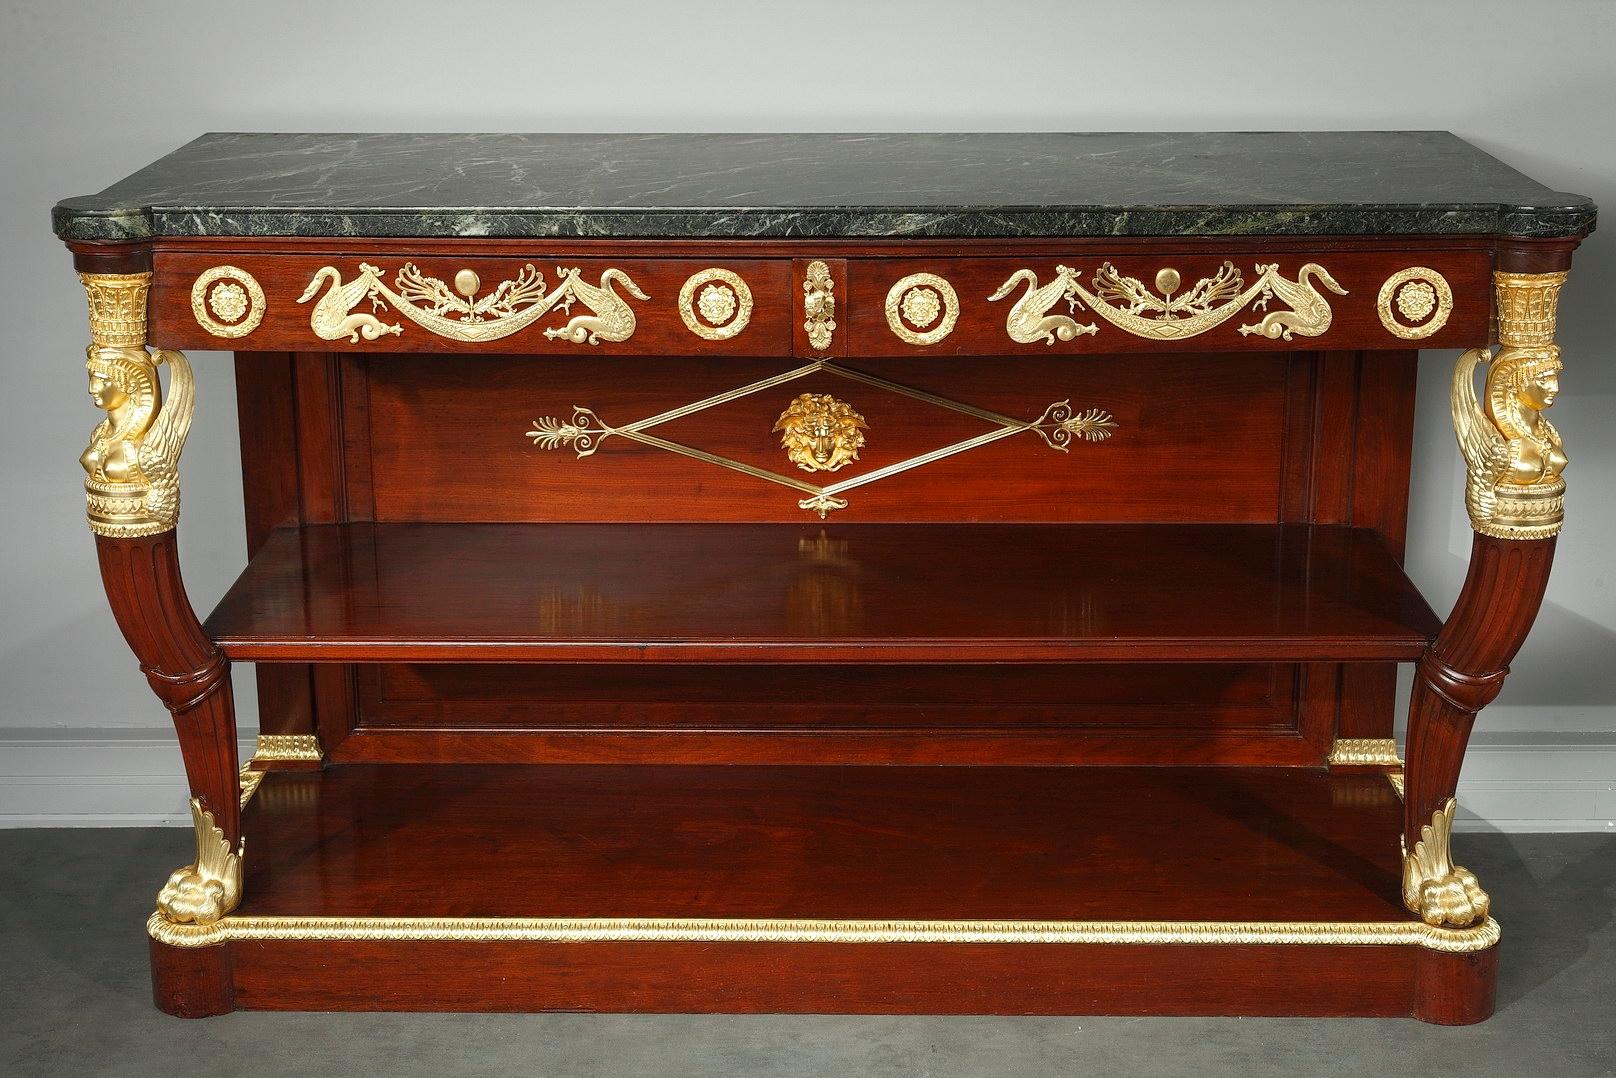 Important pair of mahogany and mahogany veneer console tables with exquisite gilt bronze decoration. The belt features two drawers highlighted with swans and masks in medallions. Supporting the marble-topped table are graceful cabriole legs, that